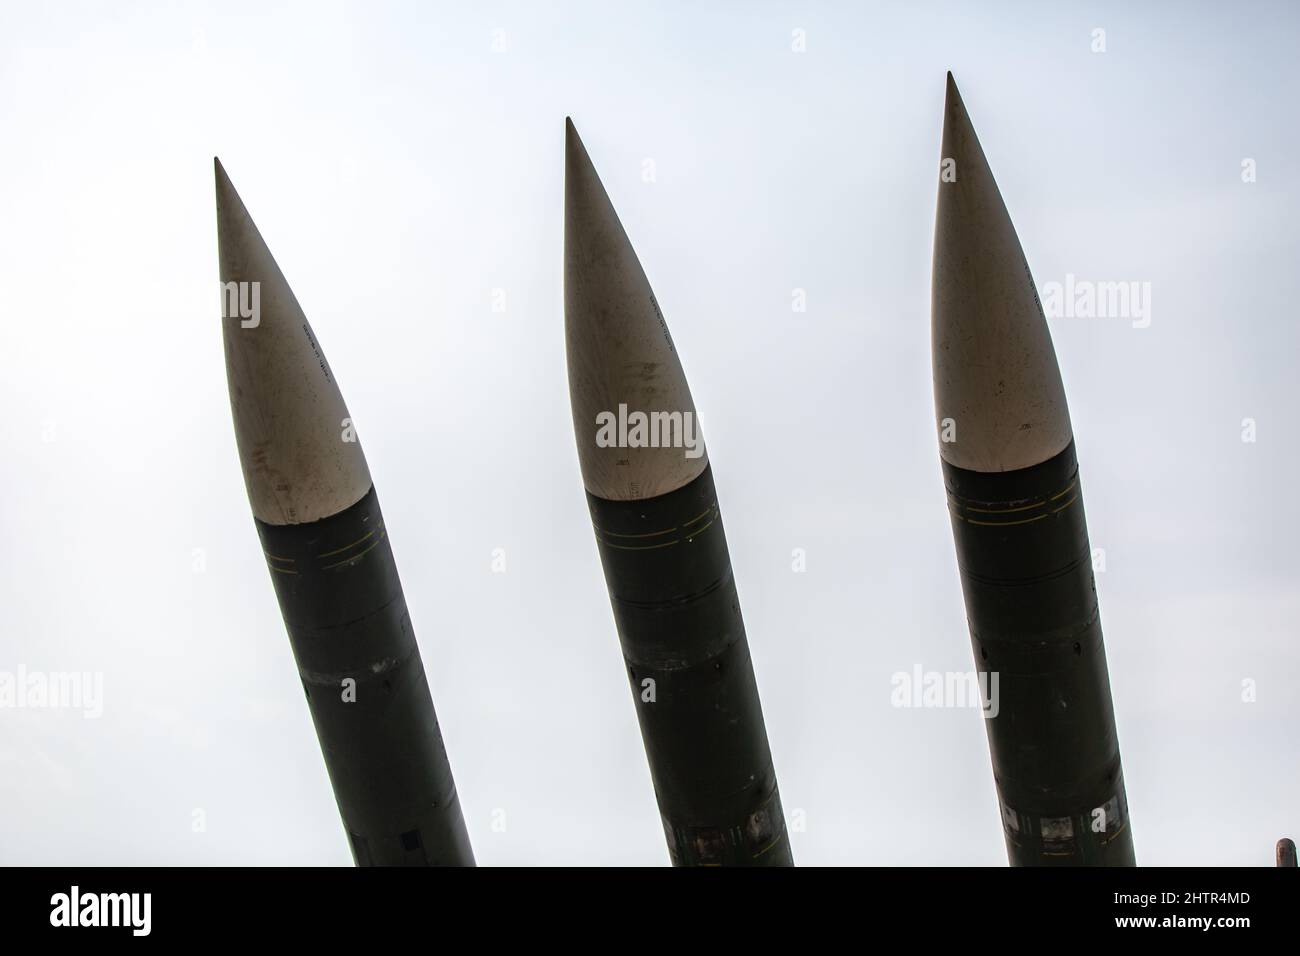 Russian rocket offensive weapon deployed and ready to fire Stock Photo